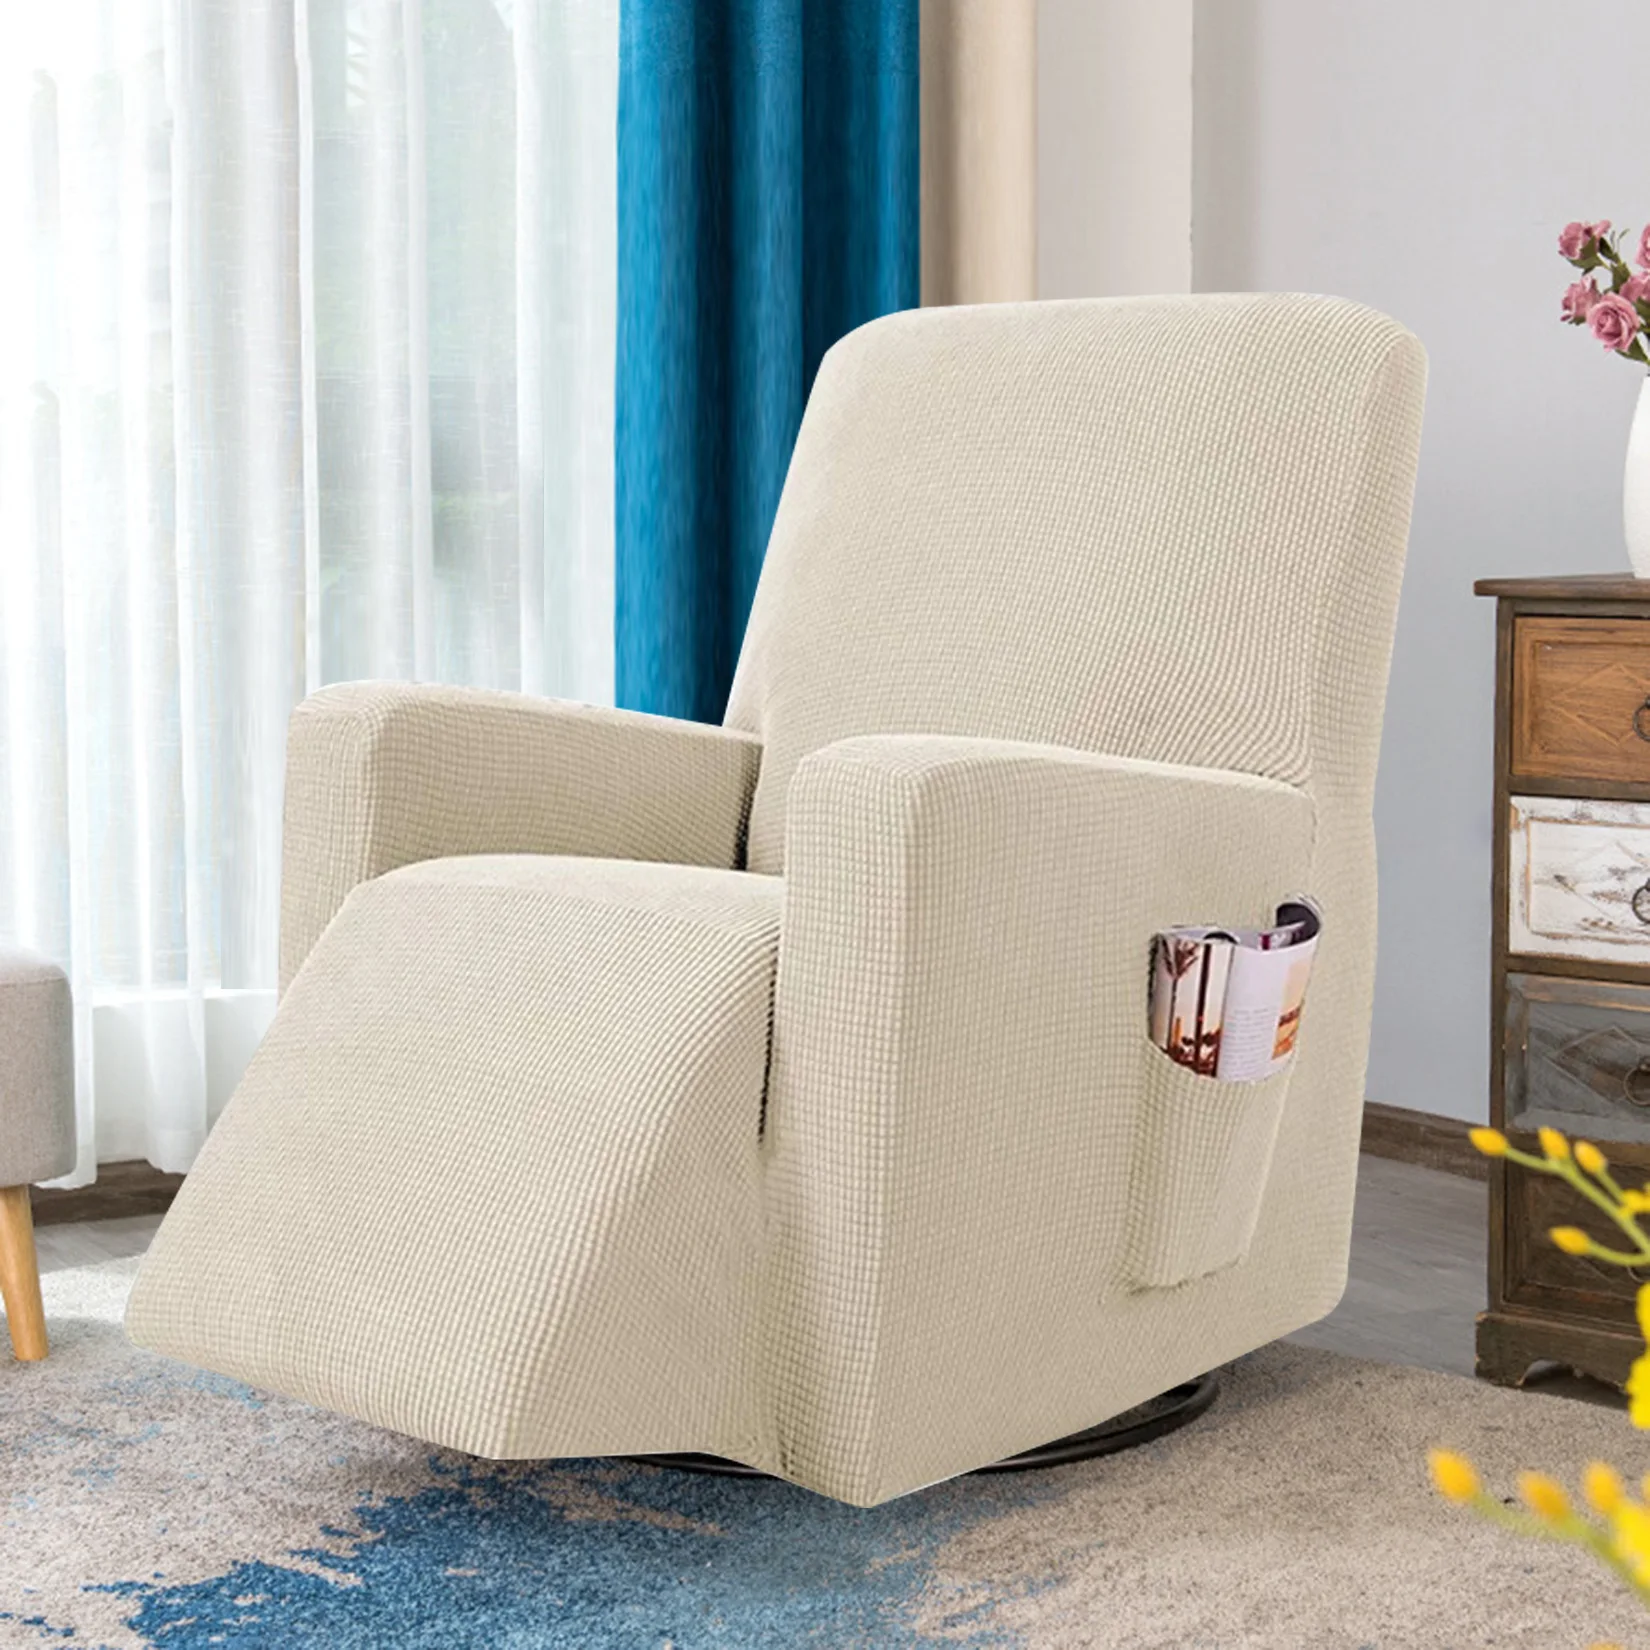 

Elastic Recliner Chair Cover All-inclusive Massage Sofa Couch Cover for Living Room Armchair Slipcover Washable Protector